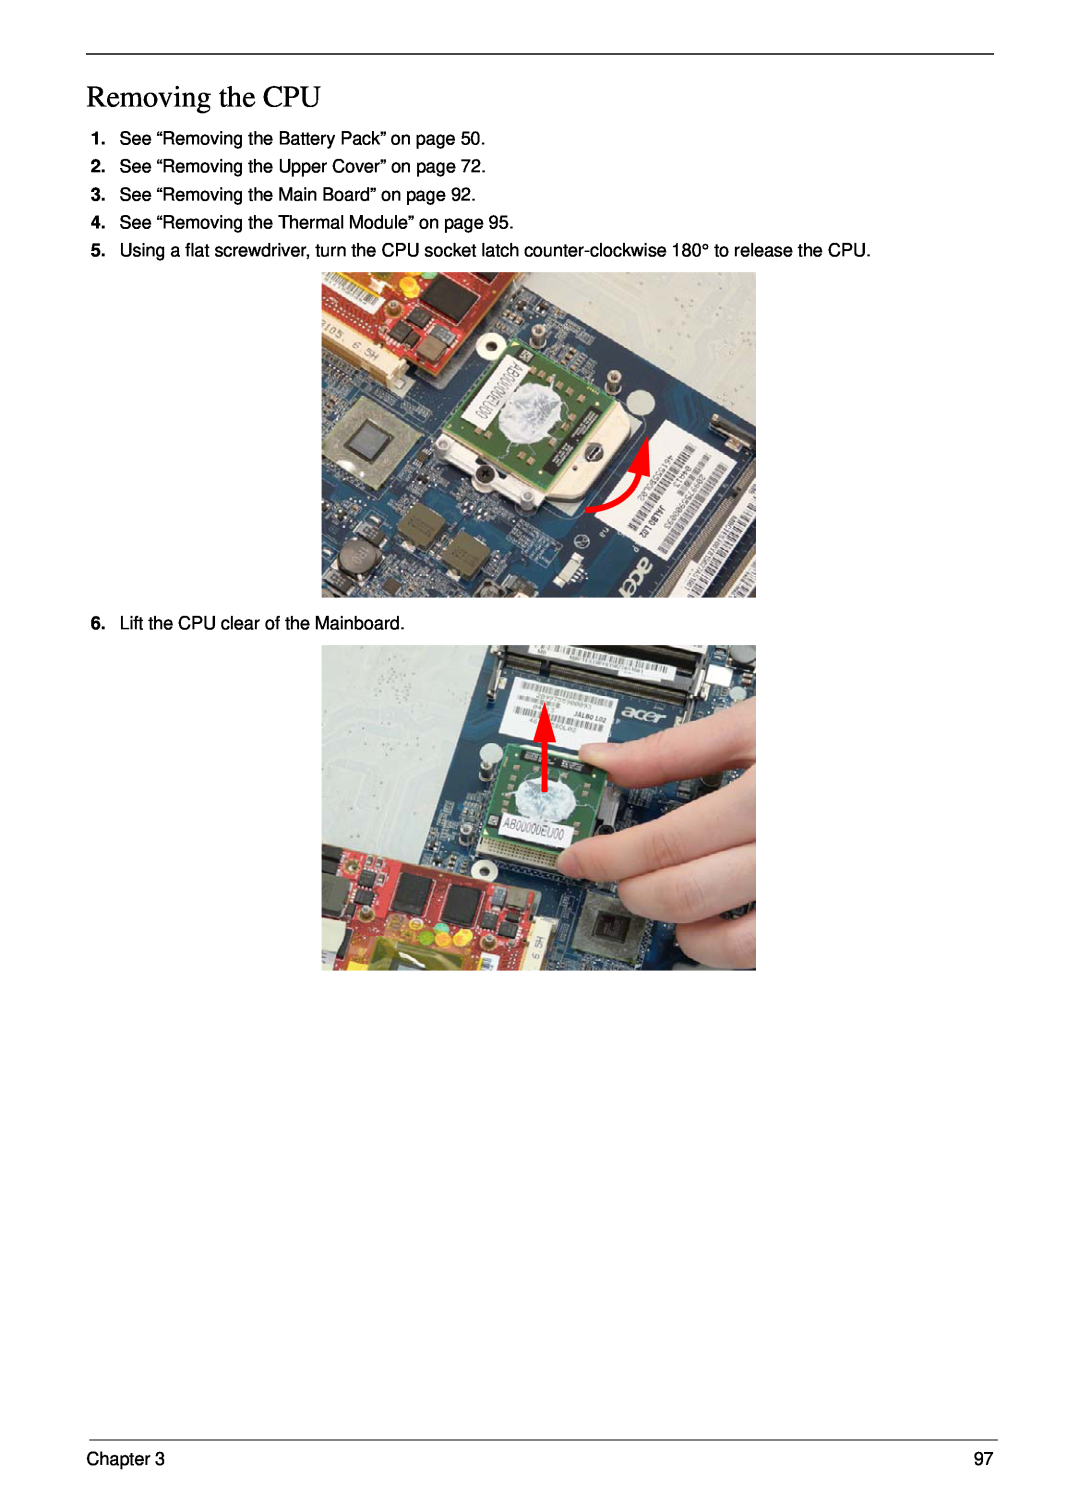 Acer 5530 manual Removing the CPU, See “Removing the Battery Pack” on page, See “Removing the Upper Cover” on page, Chapter 